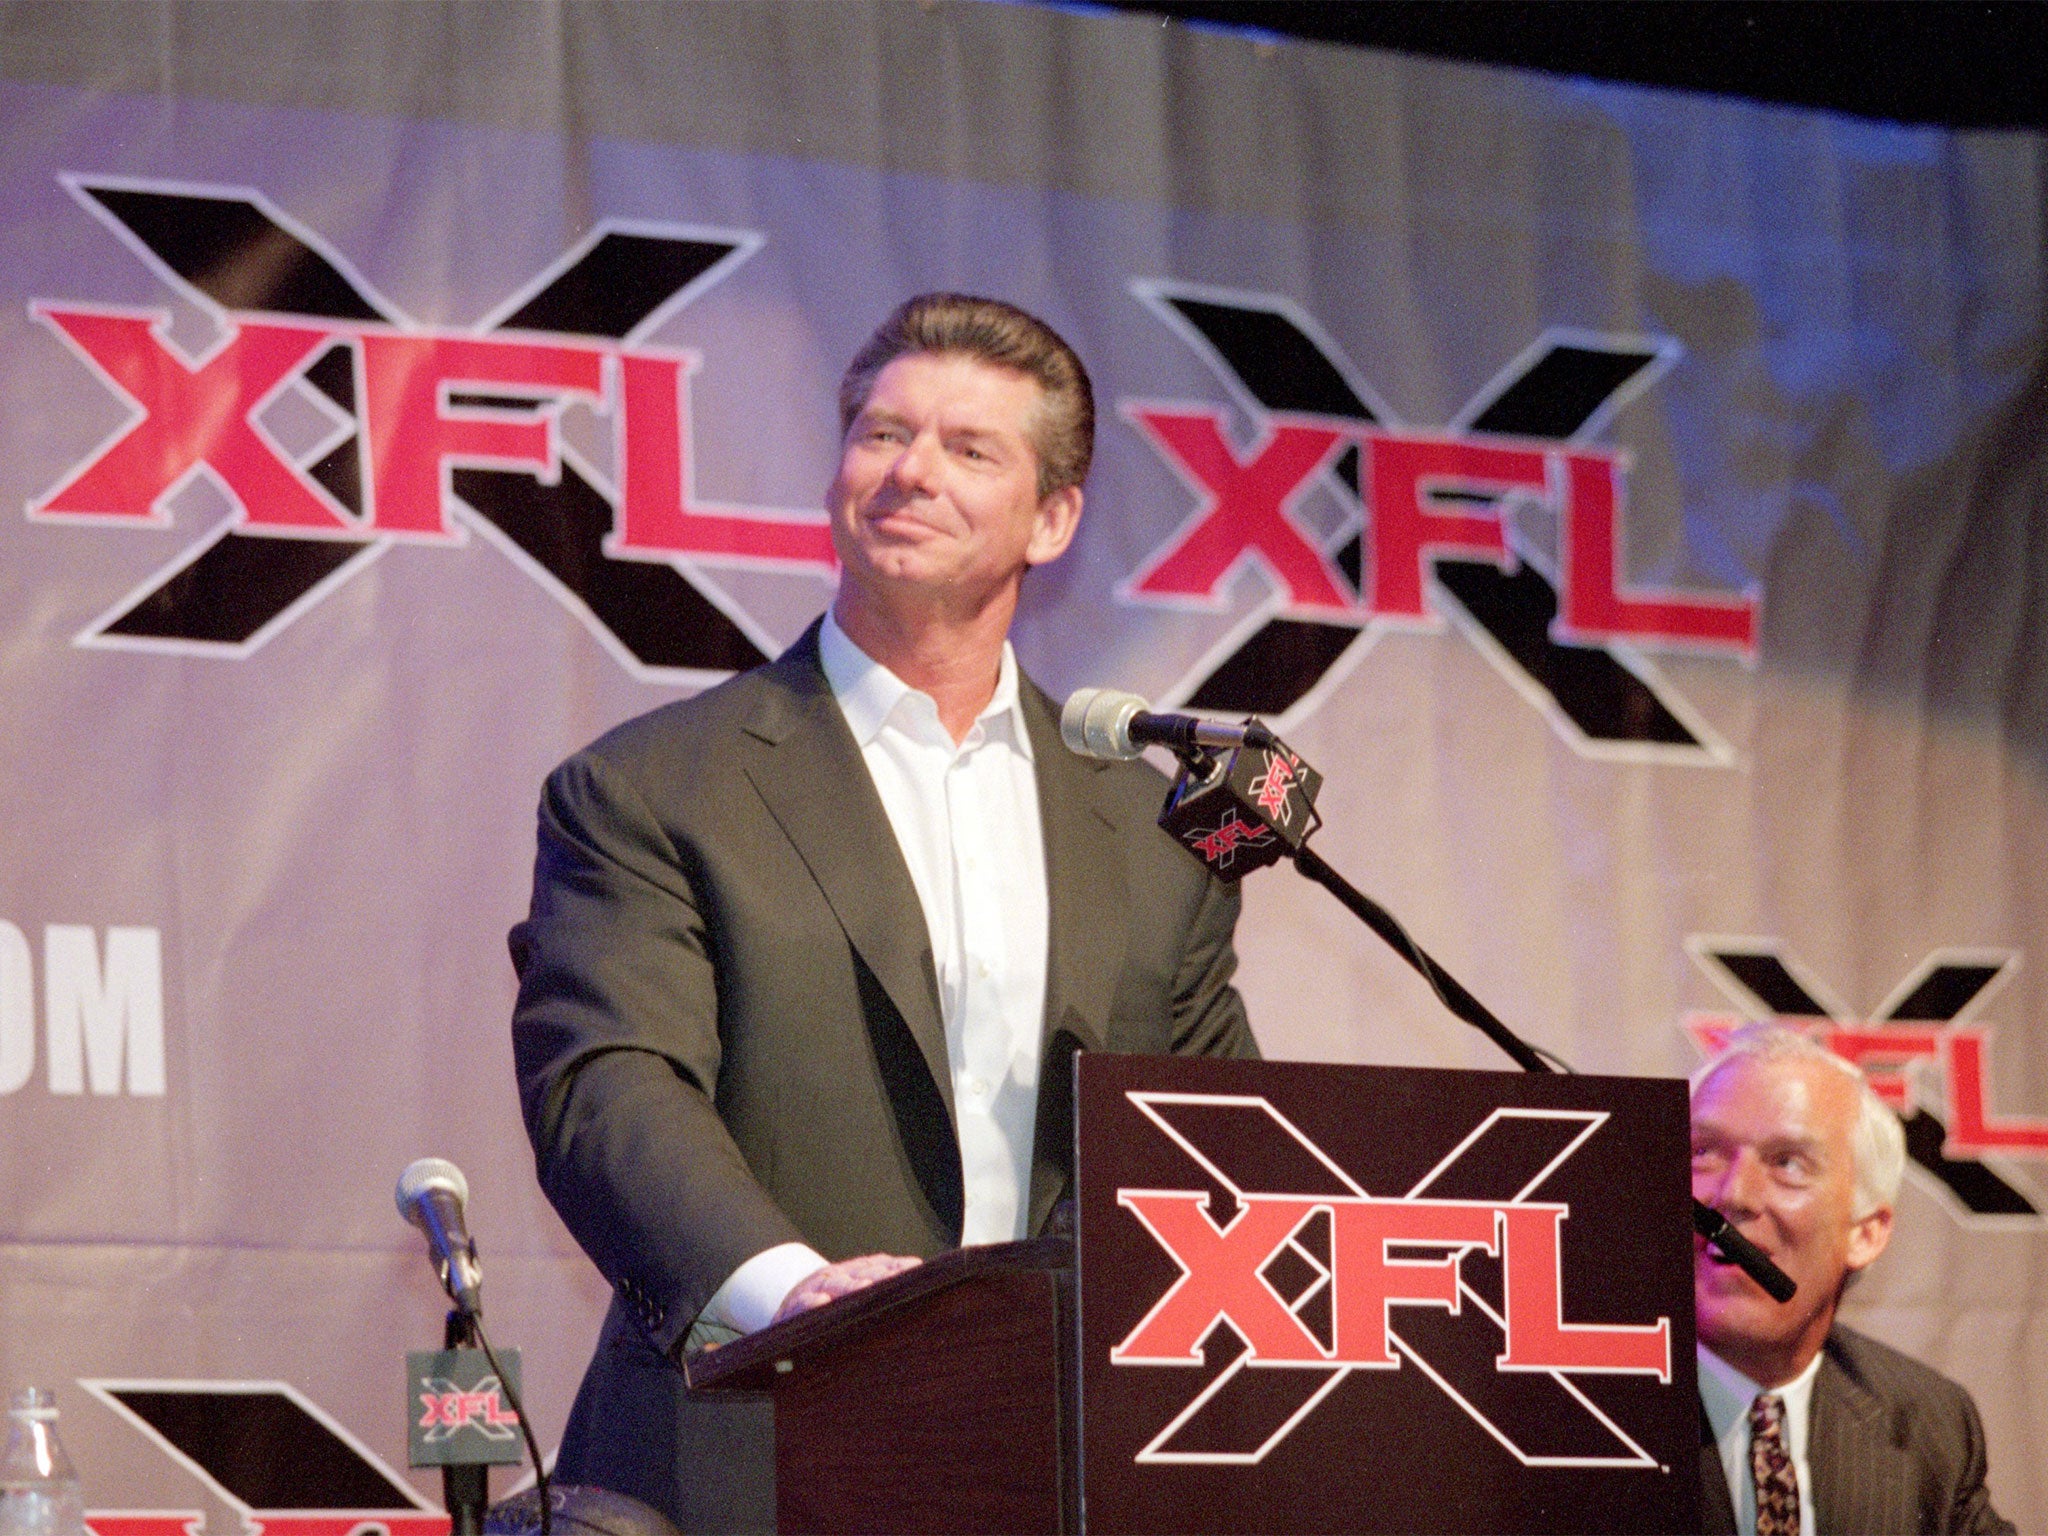 The XFL is basically an NFL for Trump supporters, its creation is a naked attempt at monetising a divided America